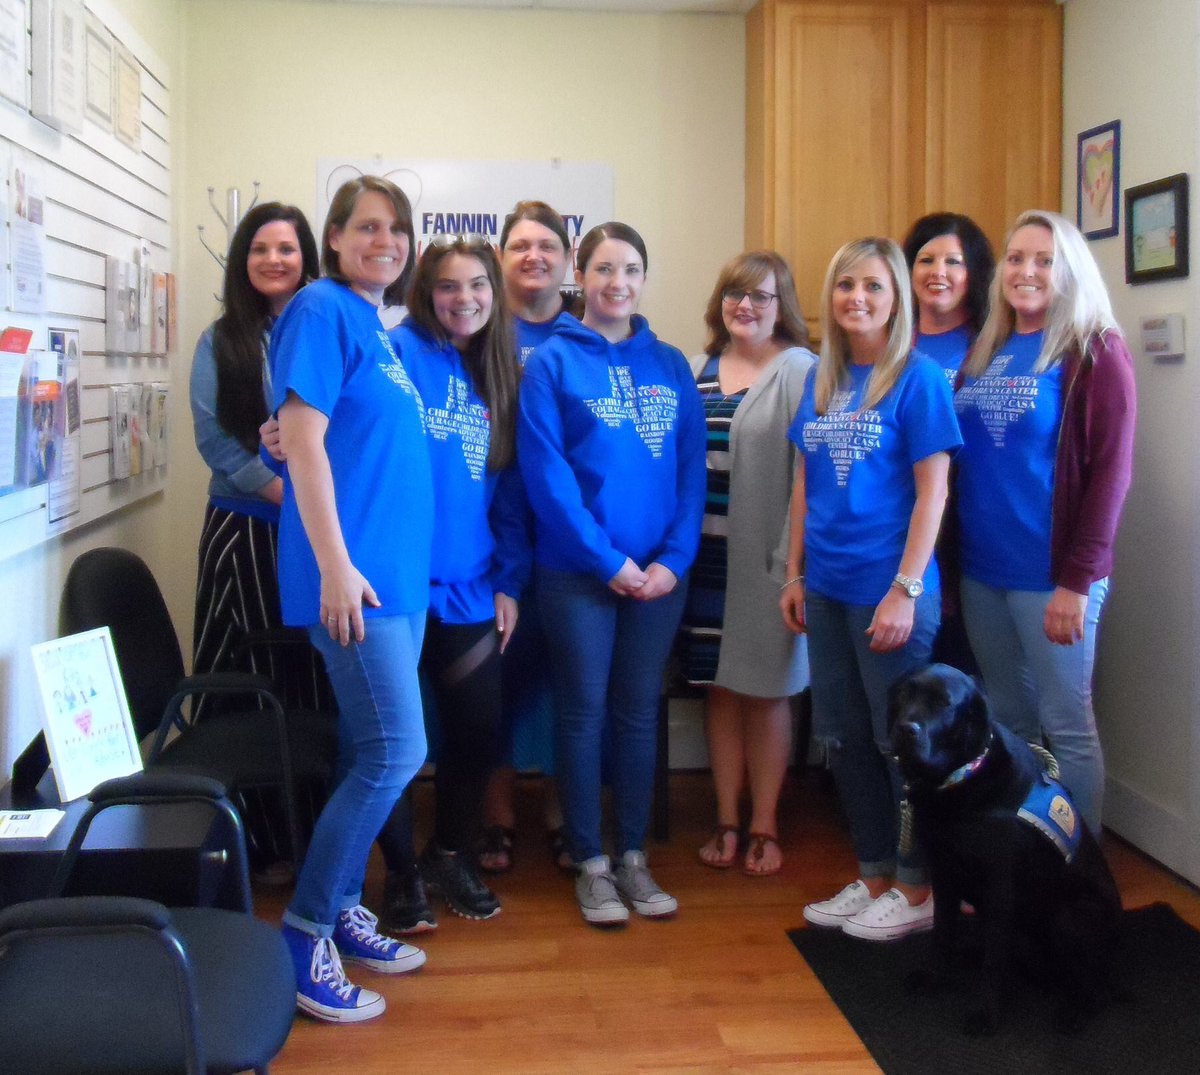 💙 the amazing women and dog I am blessed to work with 💙 #goblueday #noexcuseforchildabuse #giveadogajob